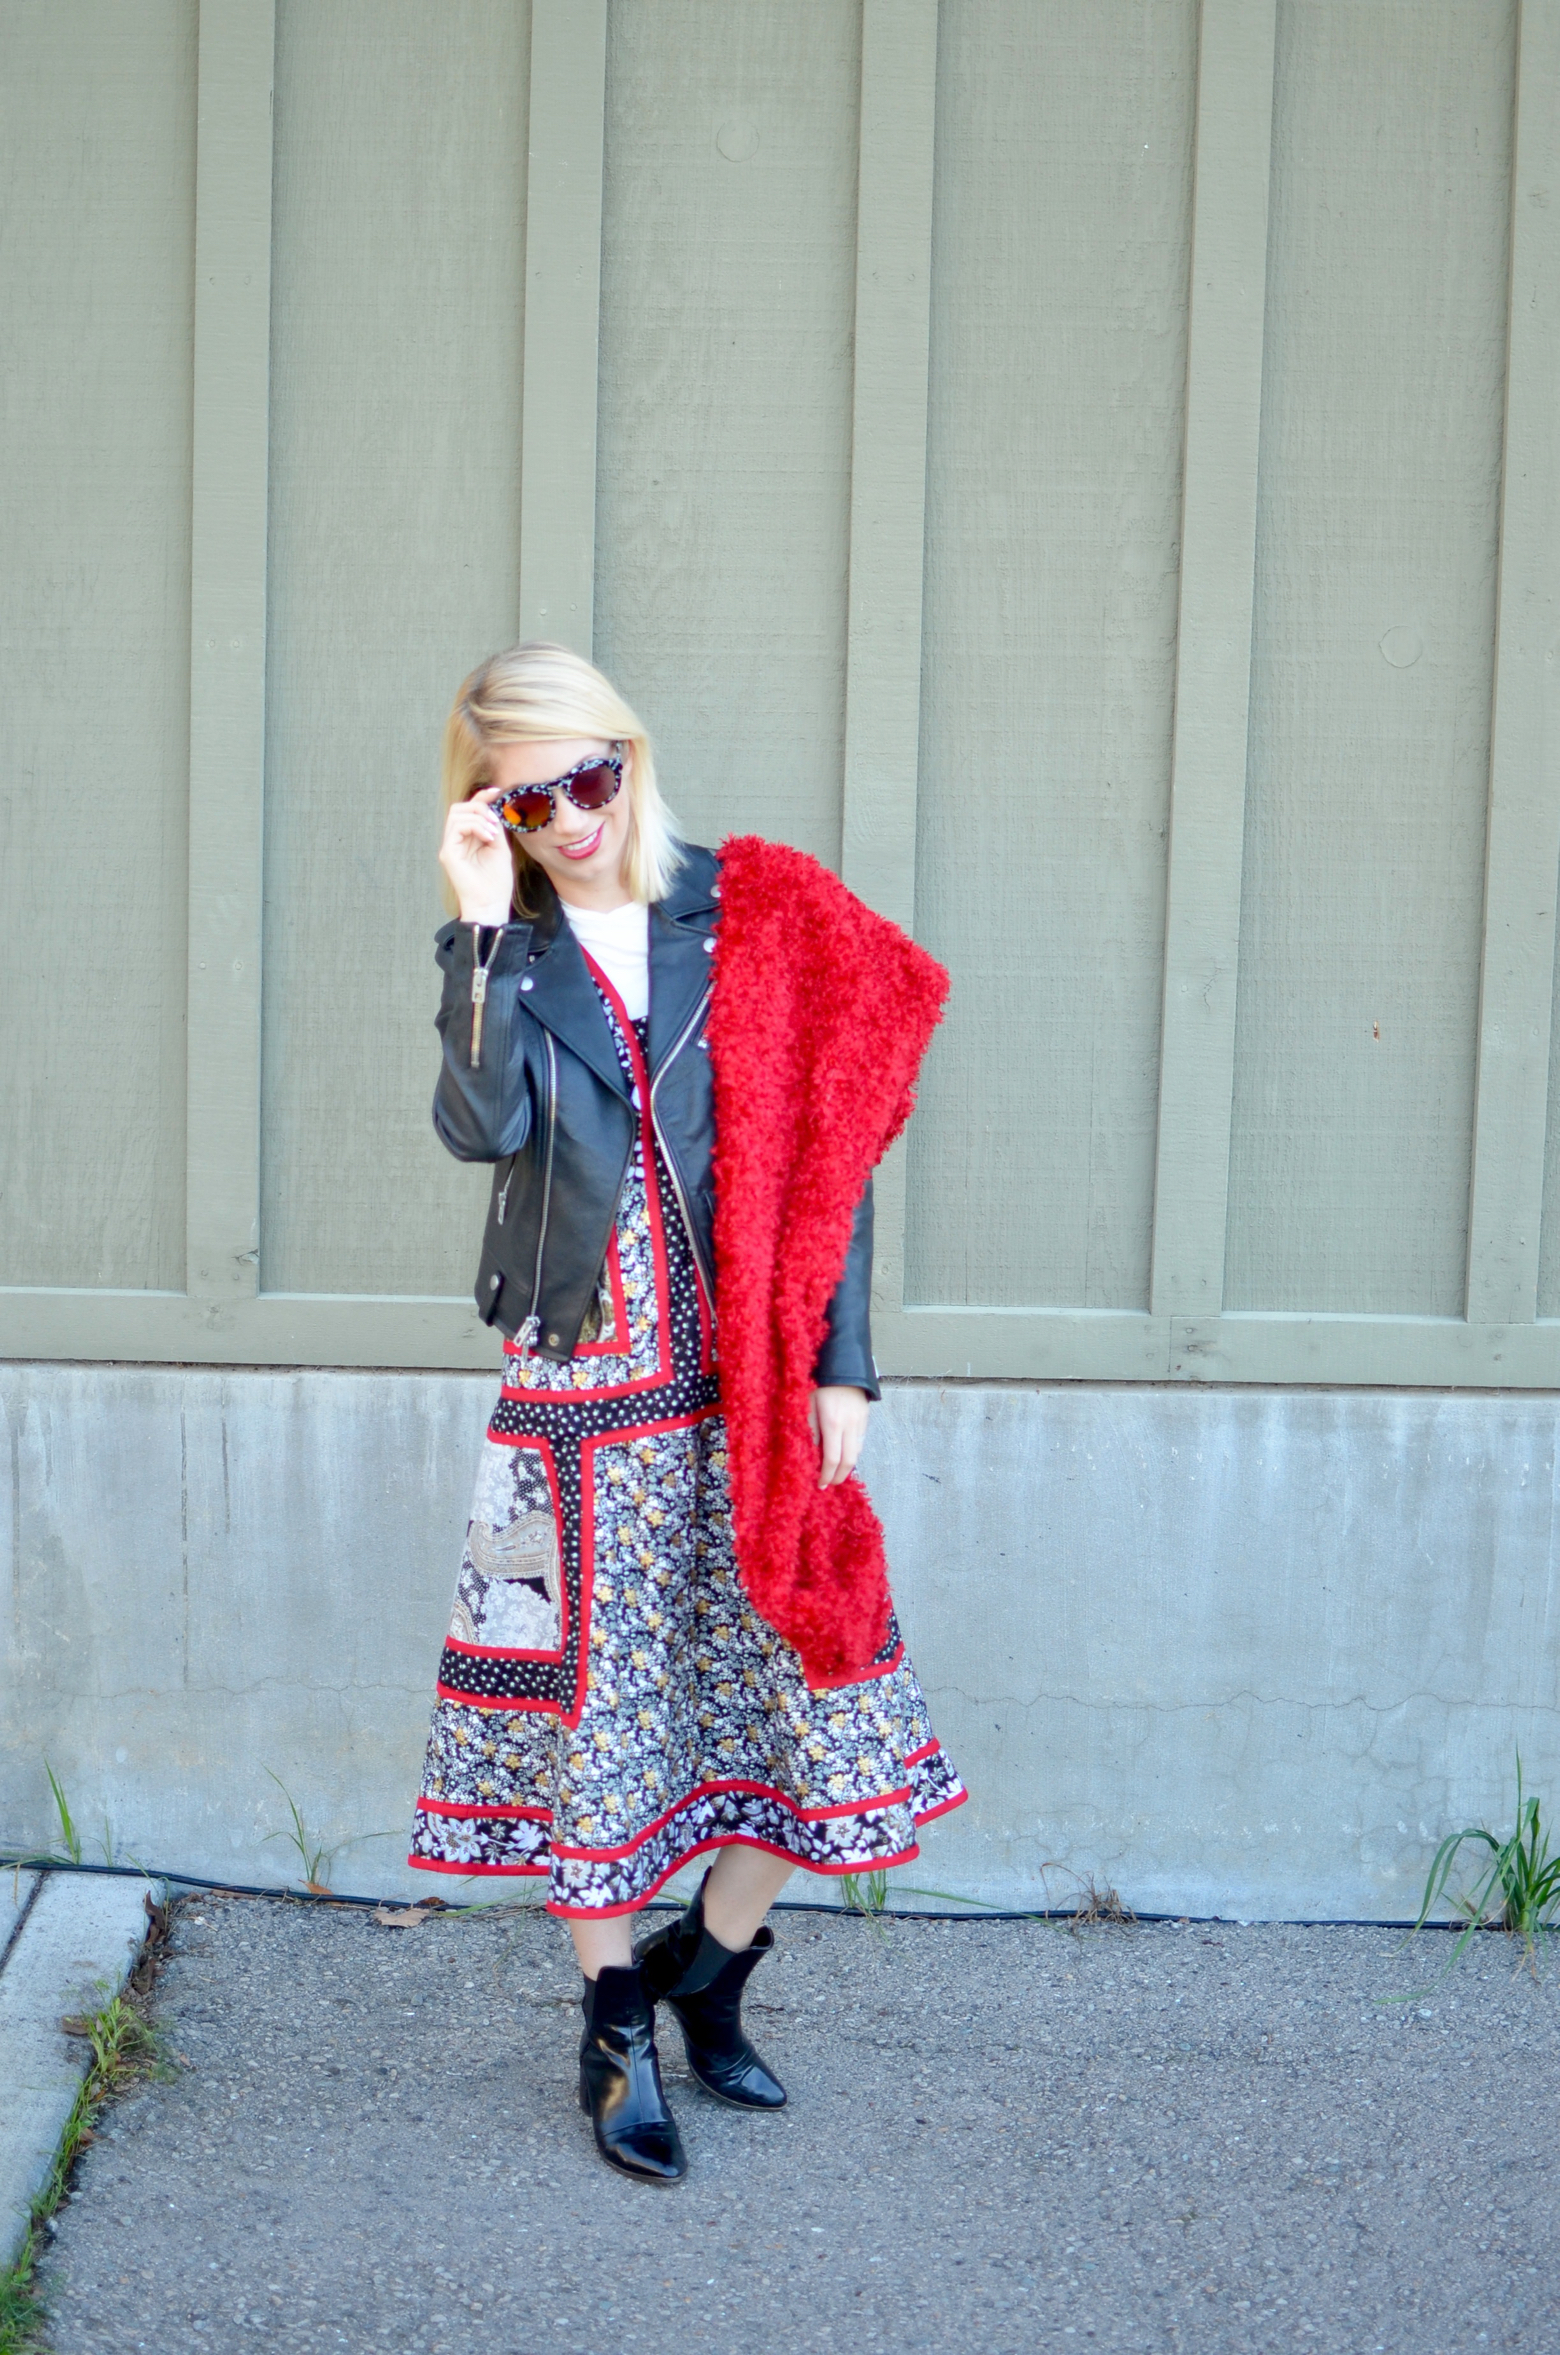 Stefanie makes a mix print red black and white dress with red fur stole for project real way // thestylesafari.com